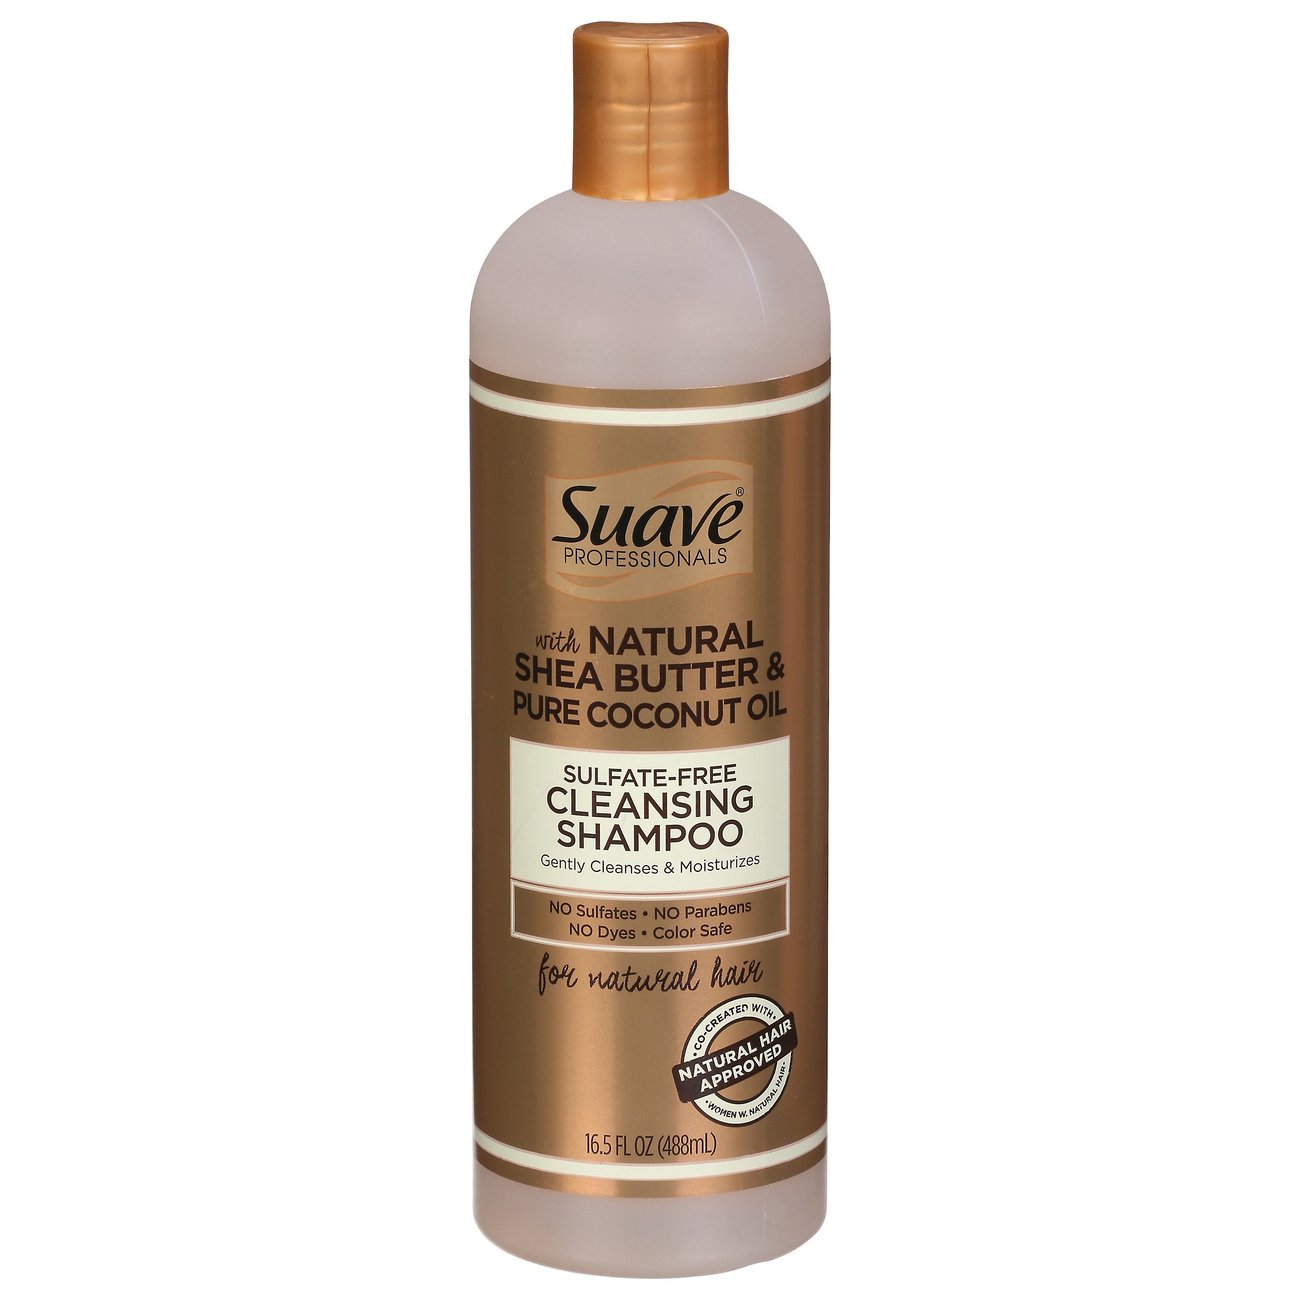 vertrouwen iets portemonnee Suave Professionals Sulfate-Free Cleansing Shampoo - Shop Hair Care at H-E-B